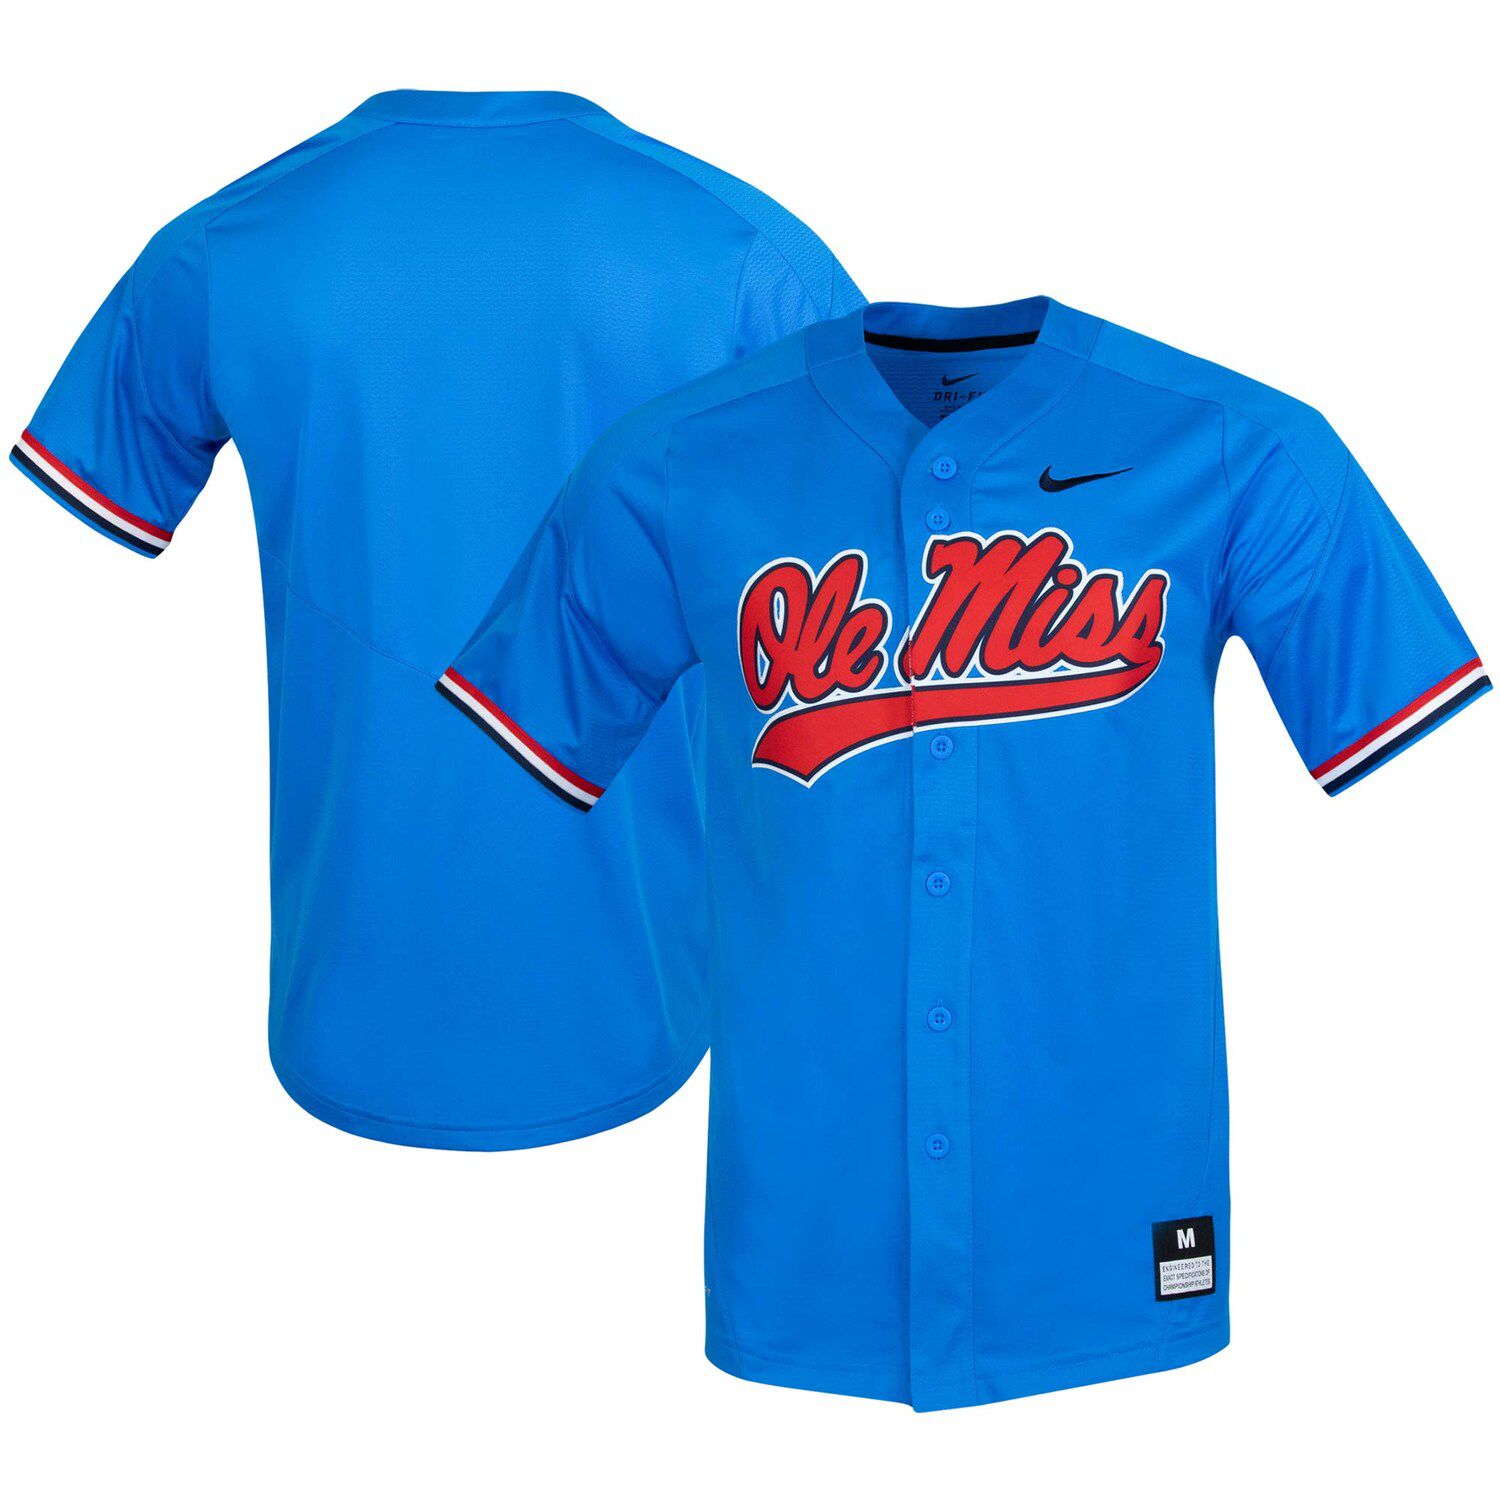 ole miss baseball jersey for sale